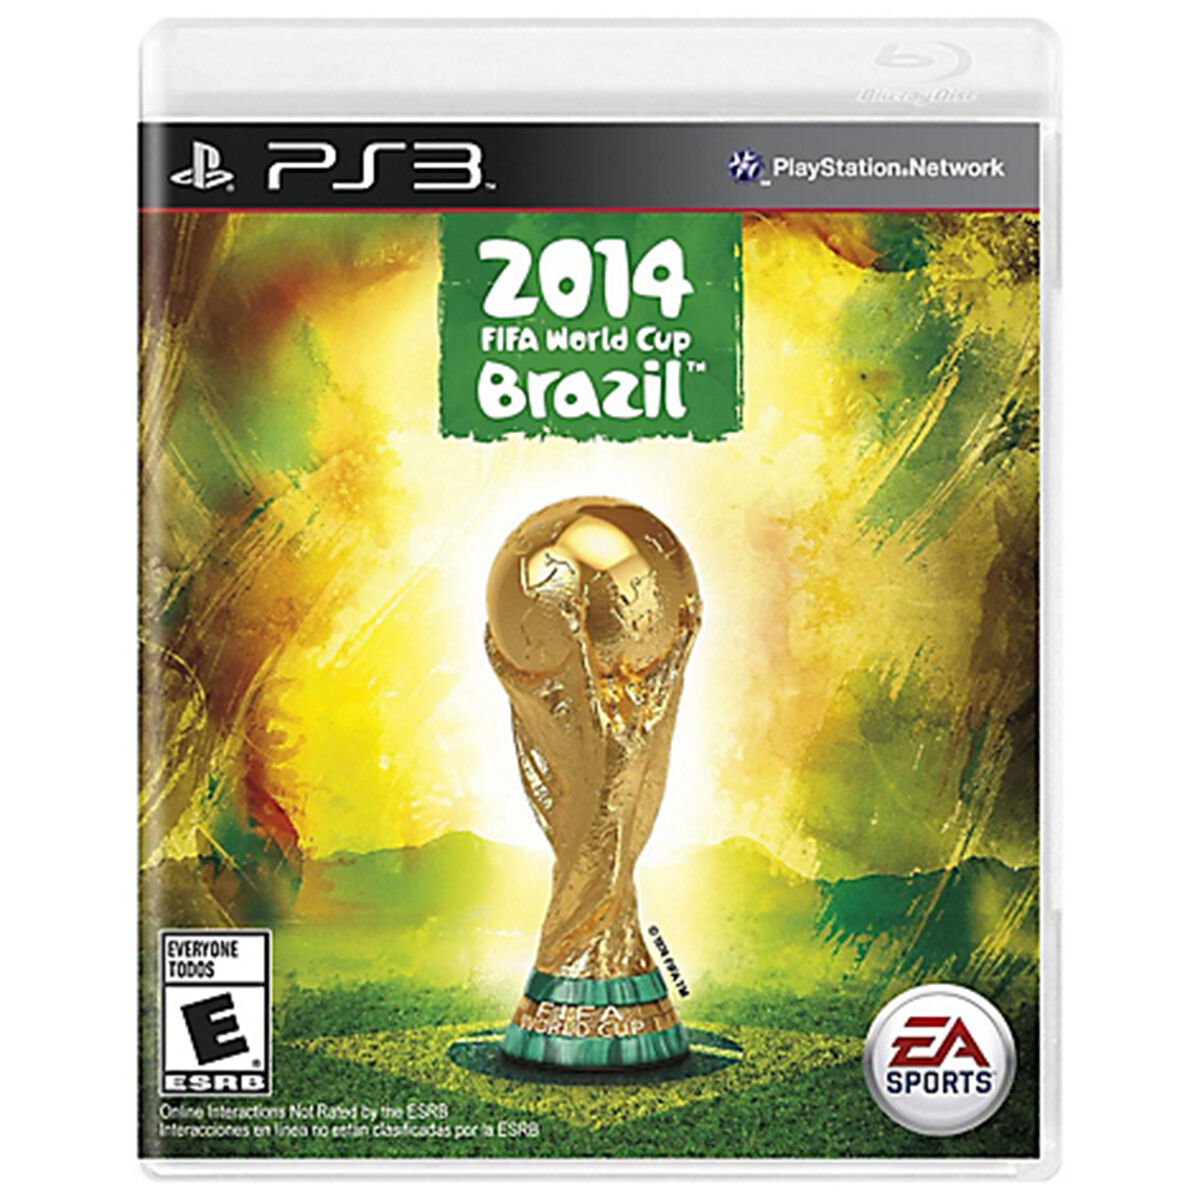 Juego PS3 FIFA World Cup 2014 Brazil